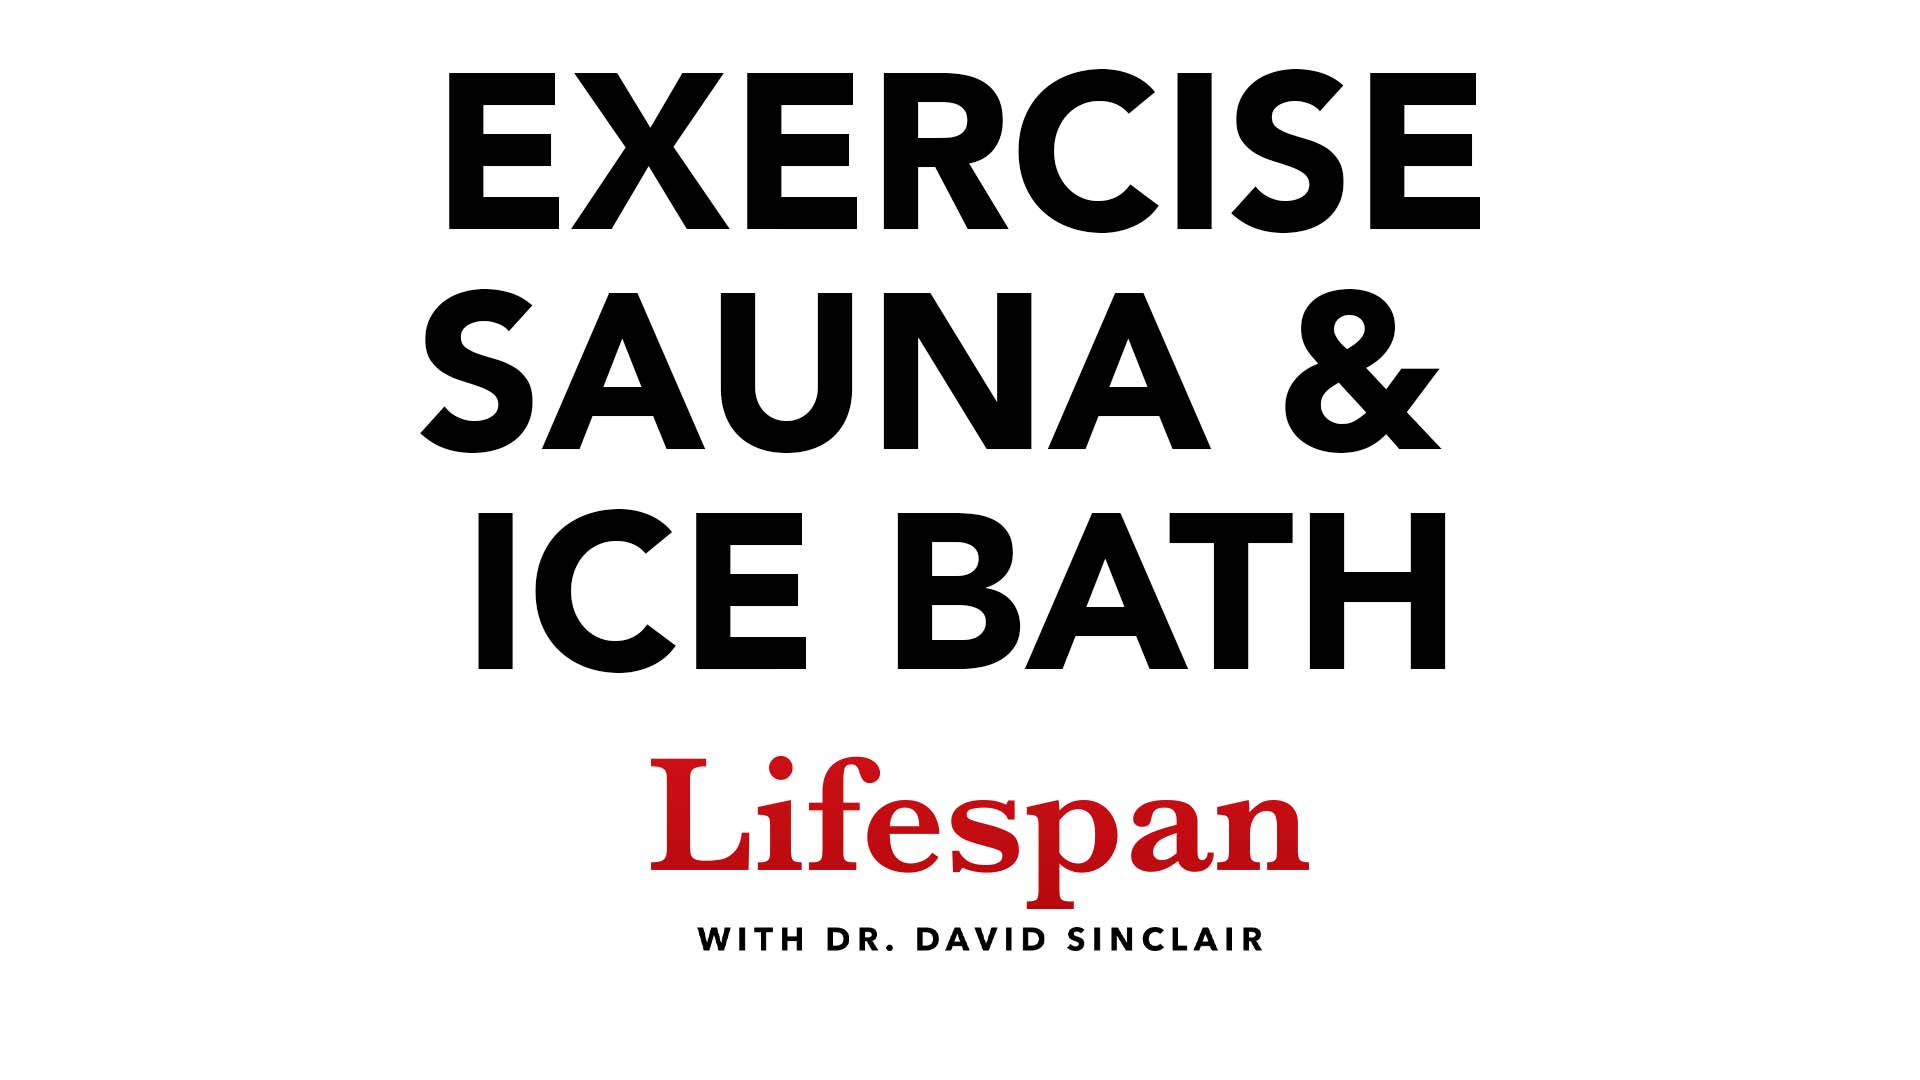 Exercise, Heat, Cold & Other Stressors for Longevity